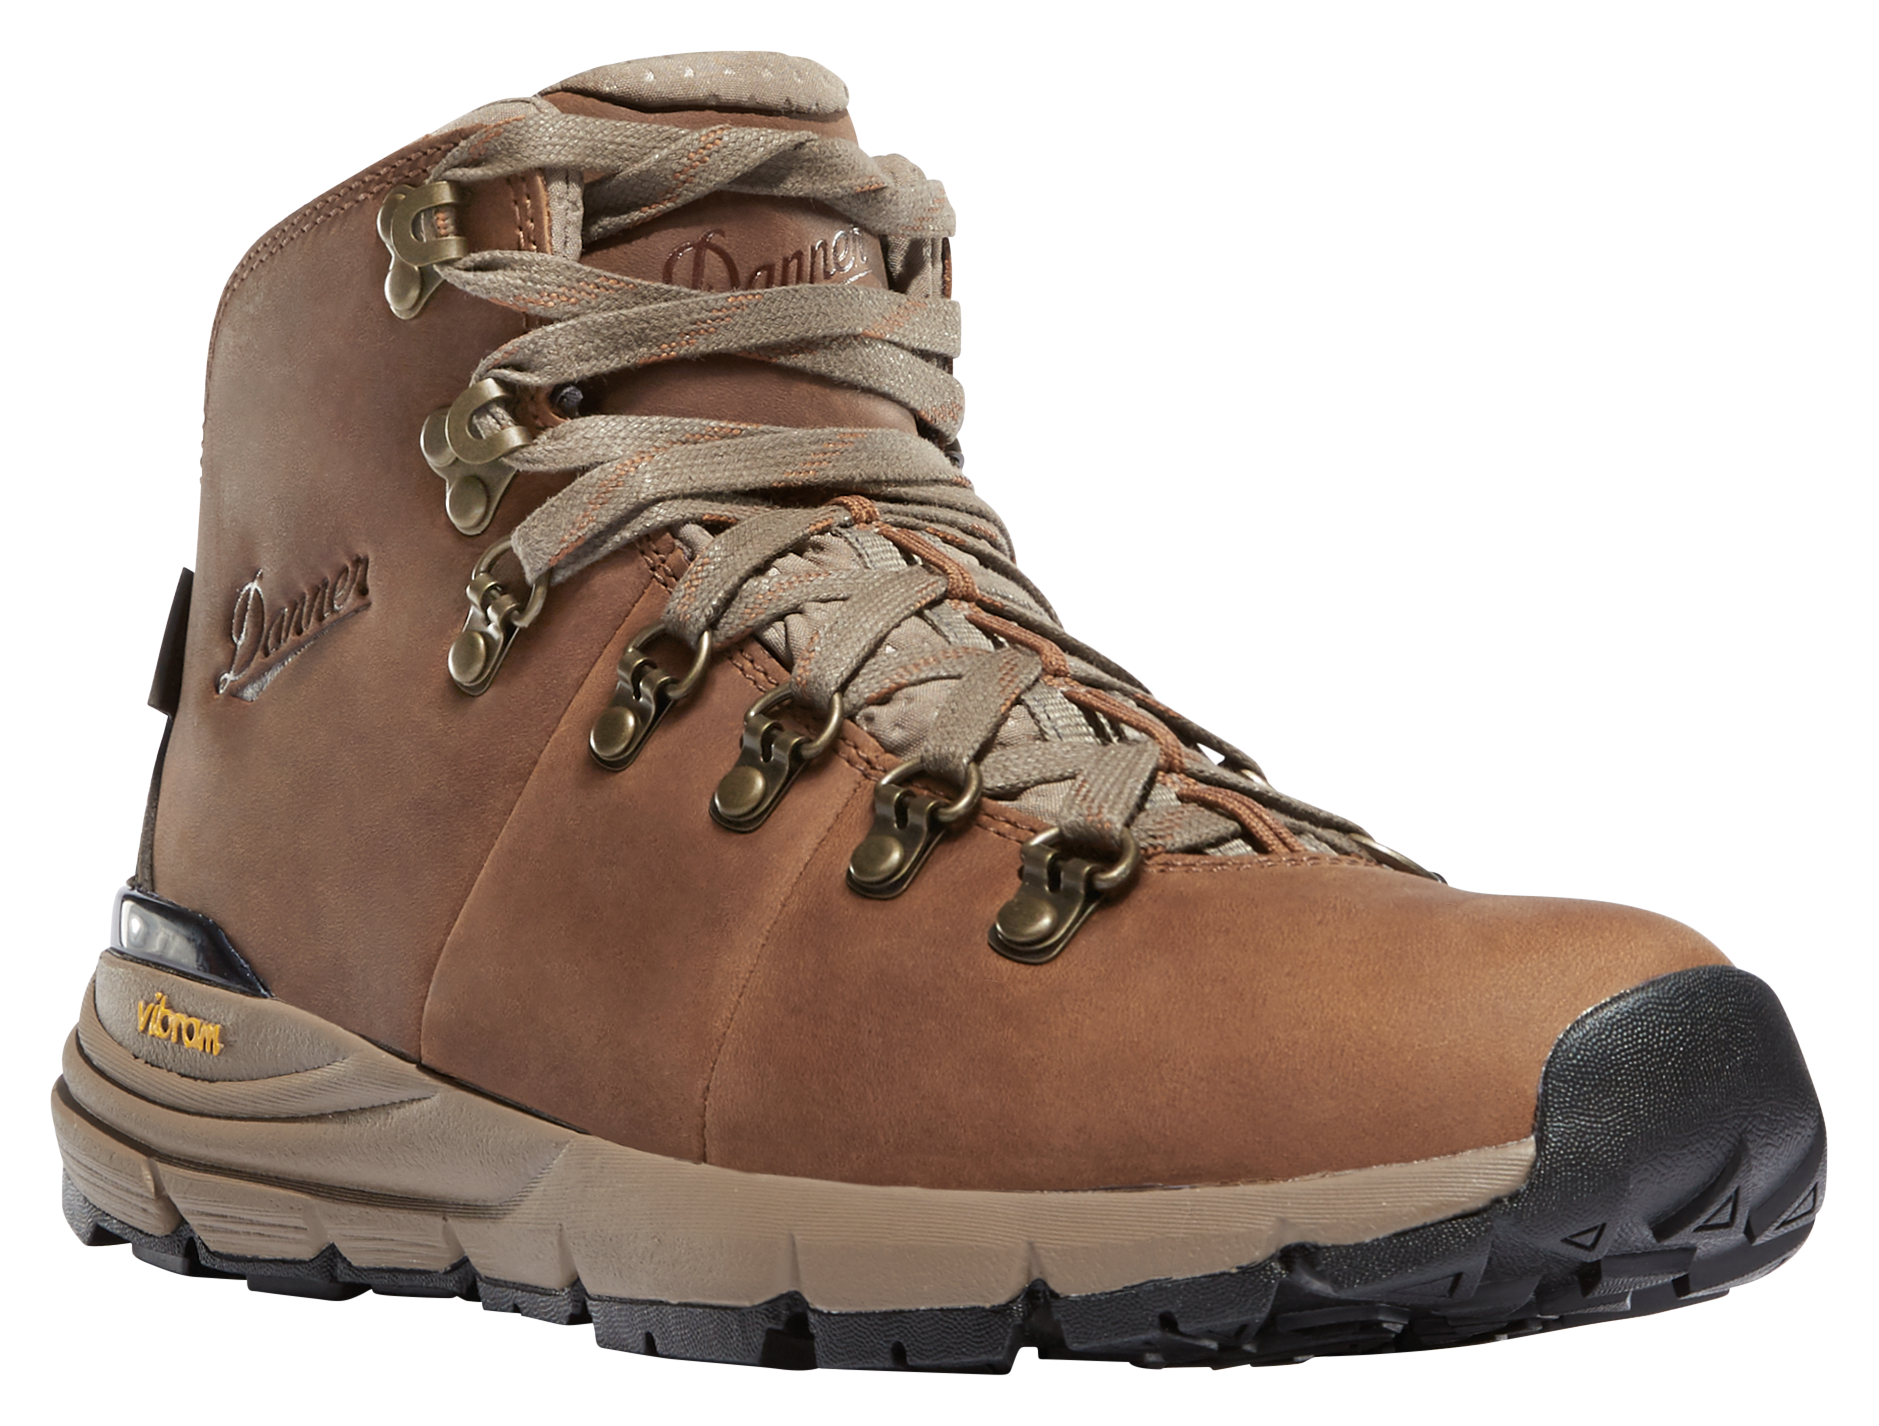 Danner Mountain 600 Leather Waterproof Hiking Boots for Ladies - Rich Brown - 10M